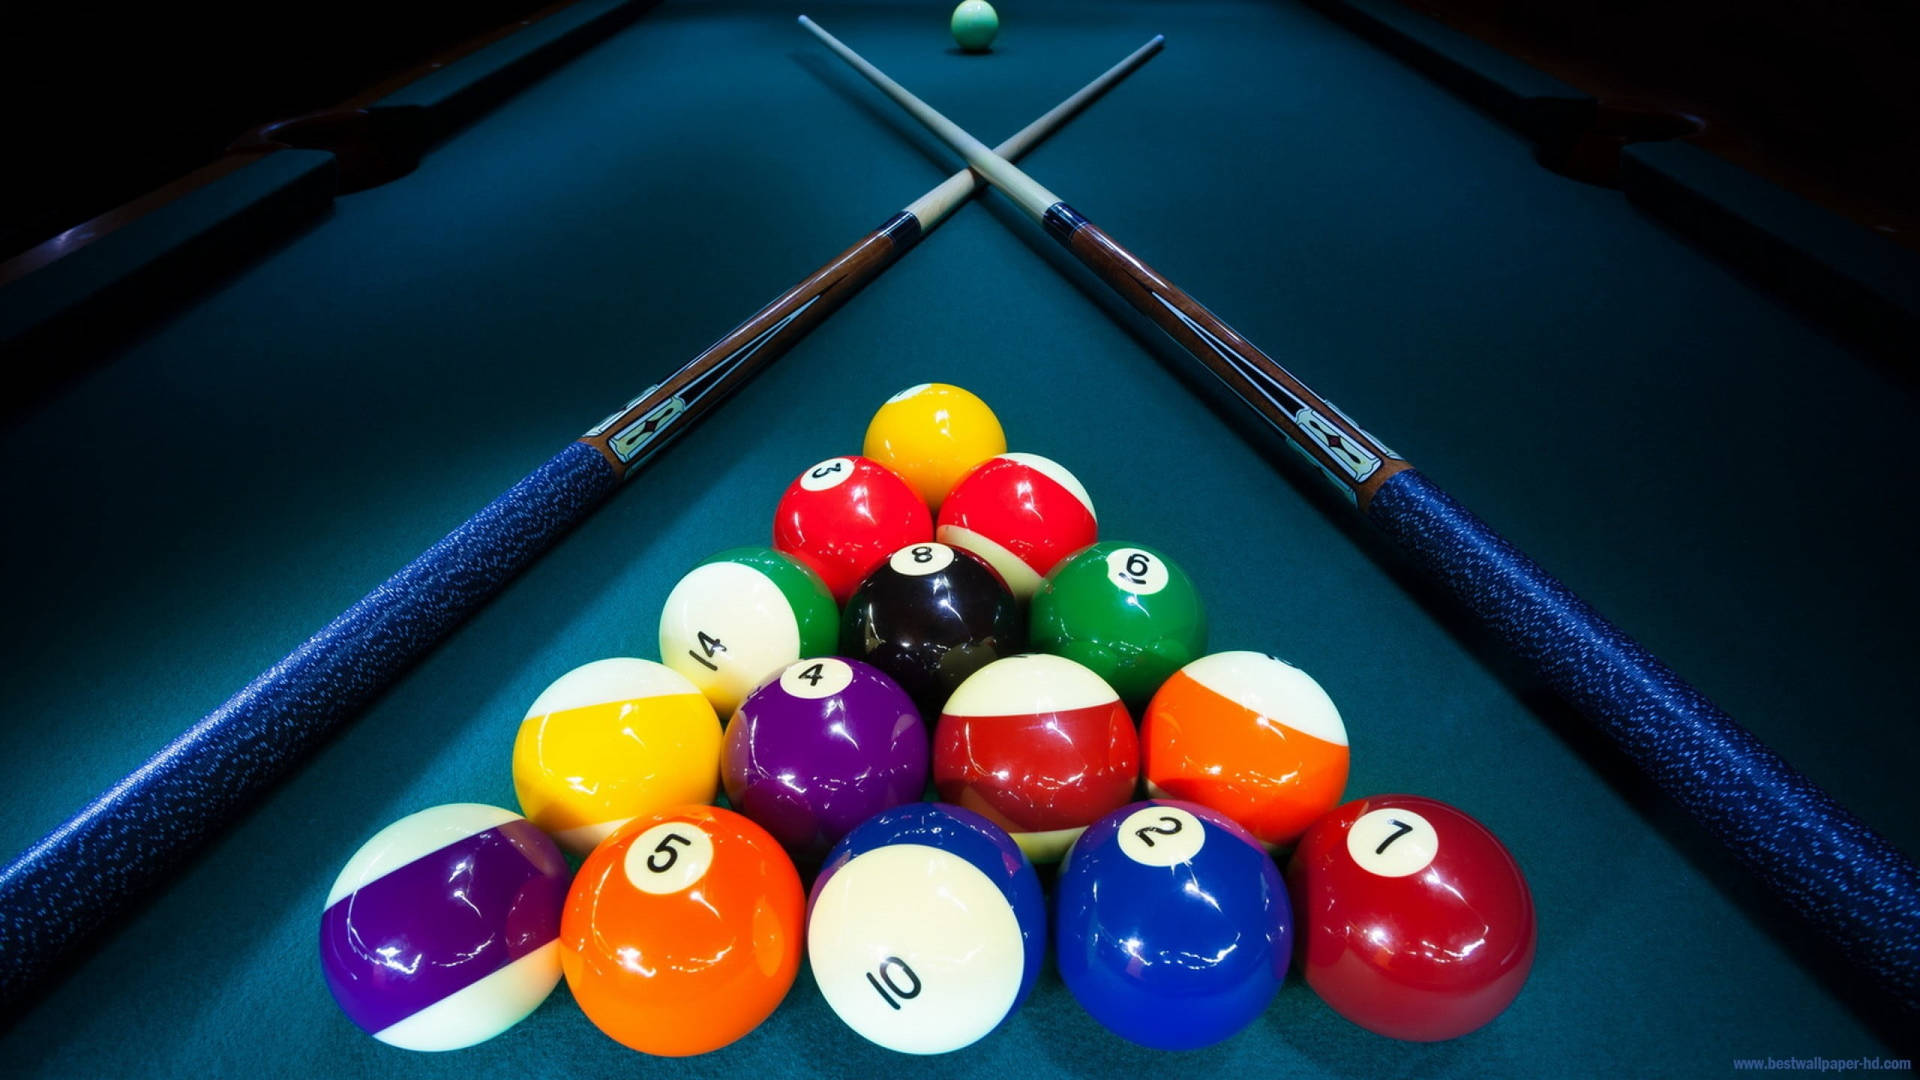 Competitive Billiard Match In Mid-play